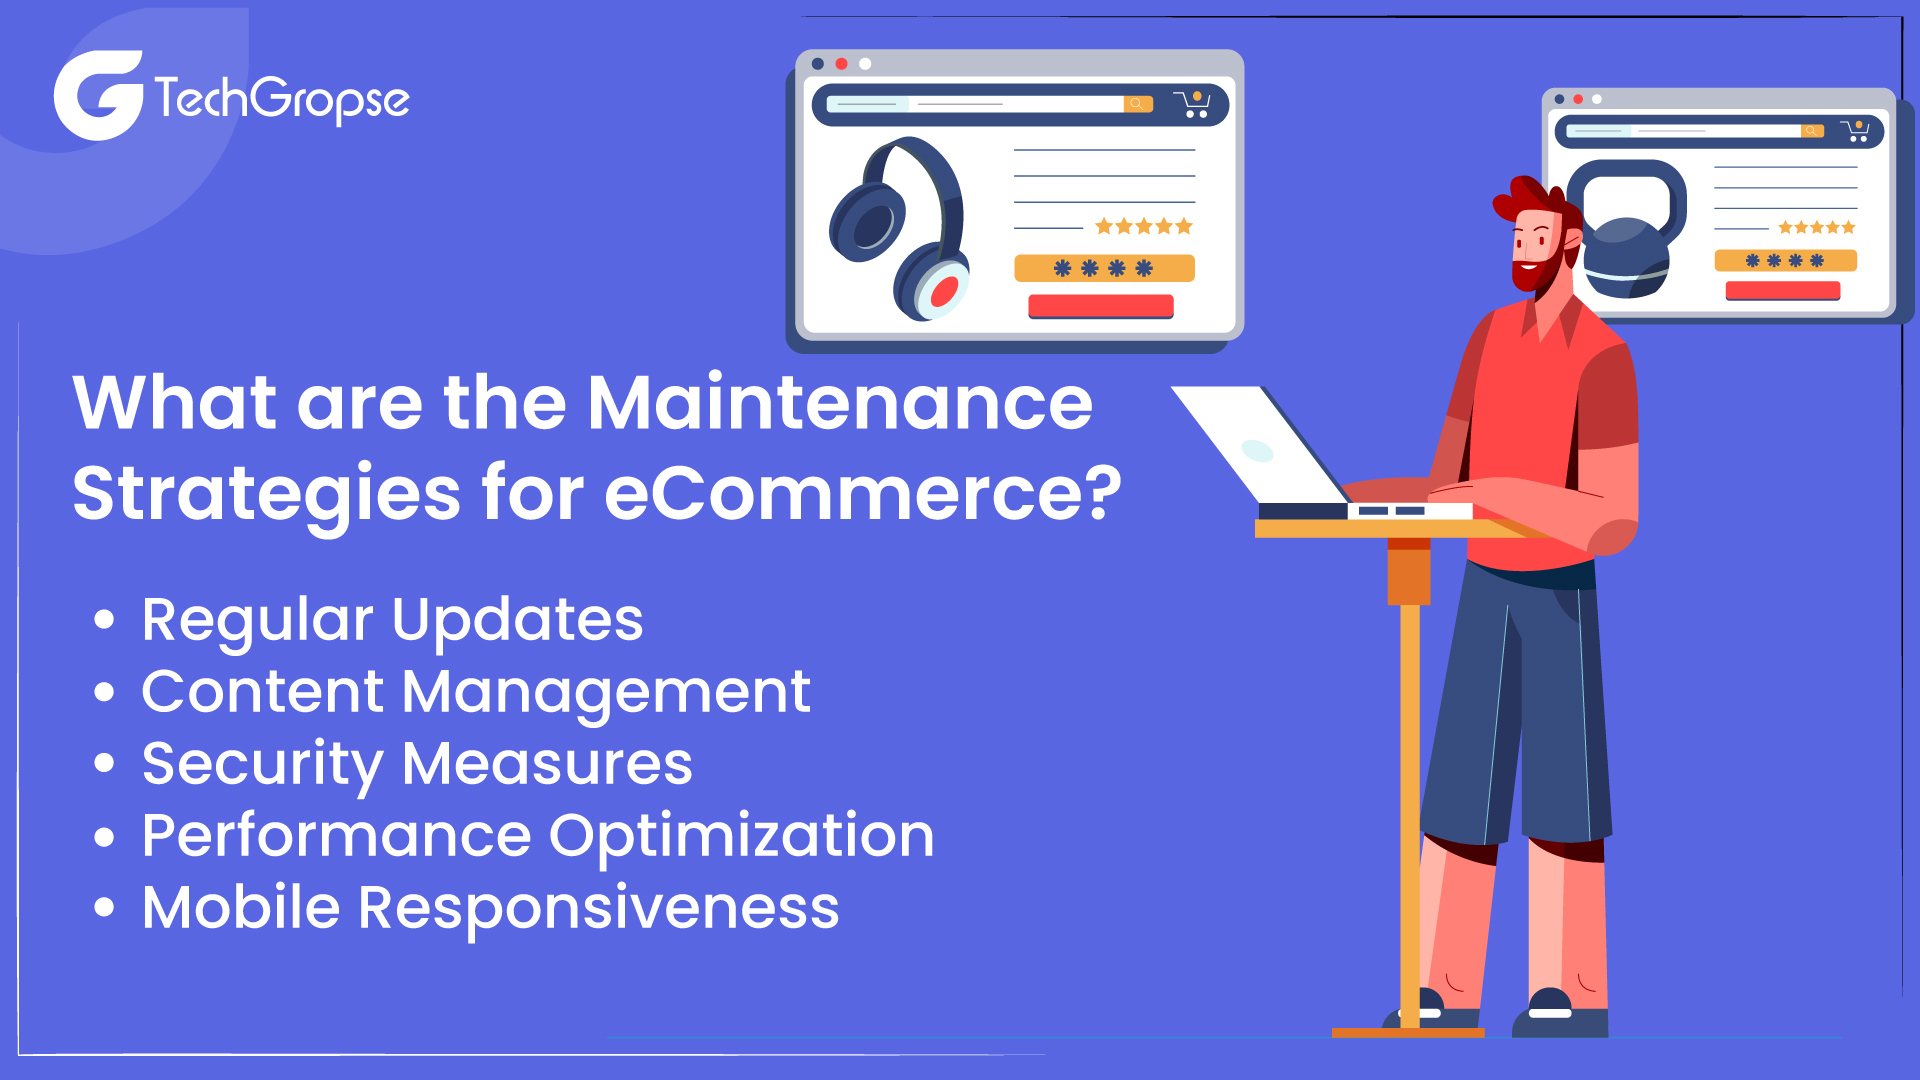 What are the Maintenance Strategies for eCommerce?